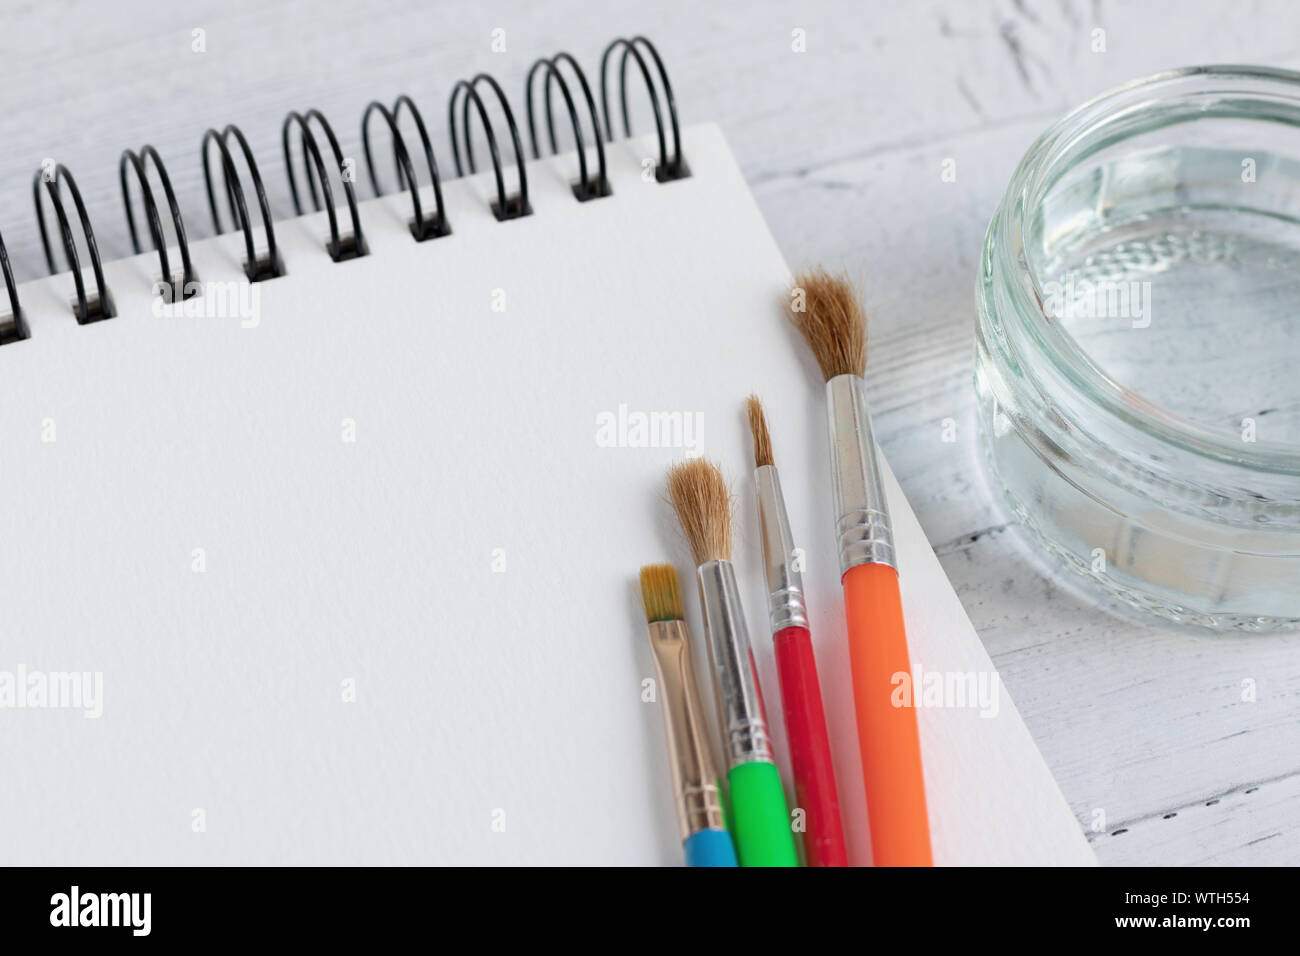 Art pad, paint brushes and glass of water on a wooden surface. Artist desk with a very shallow depth of field Stock Photo